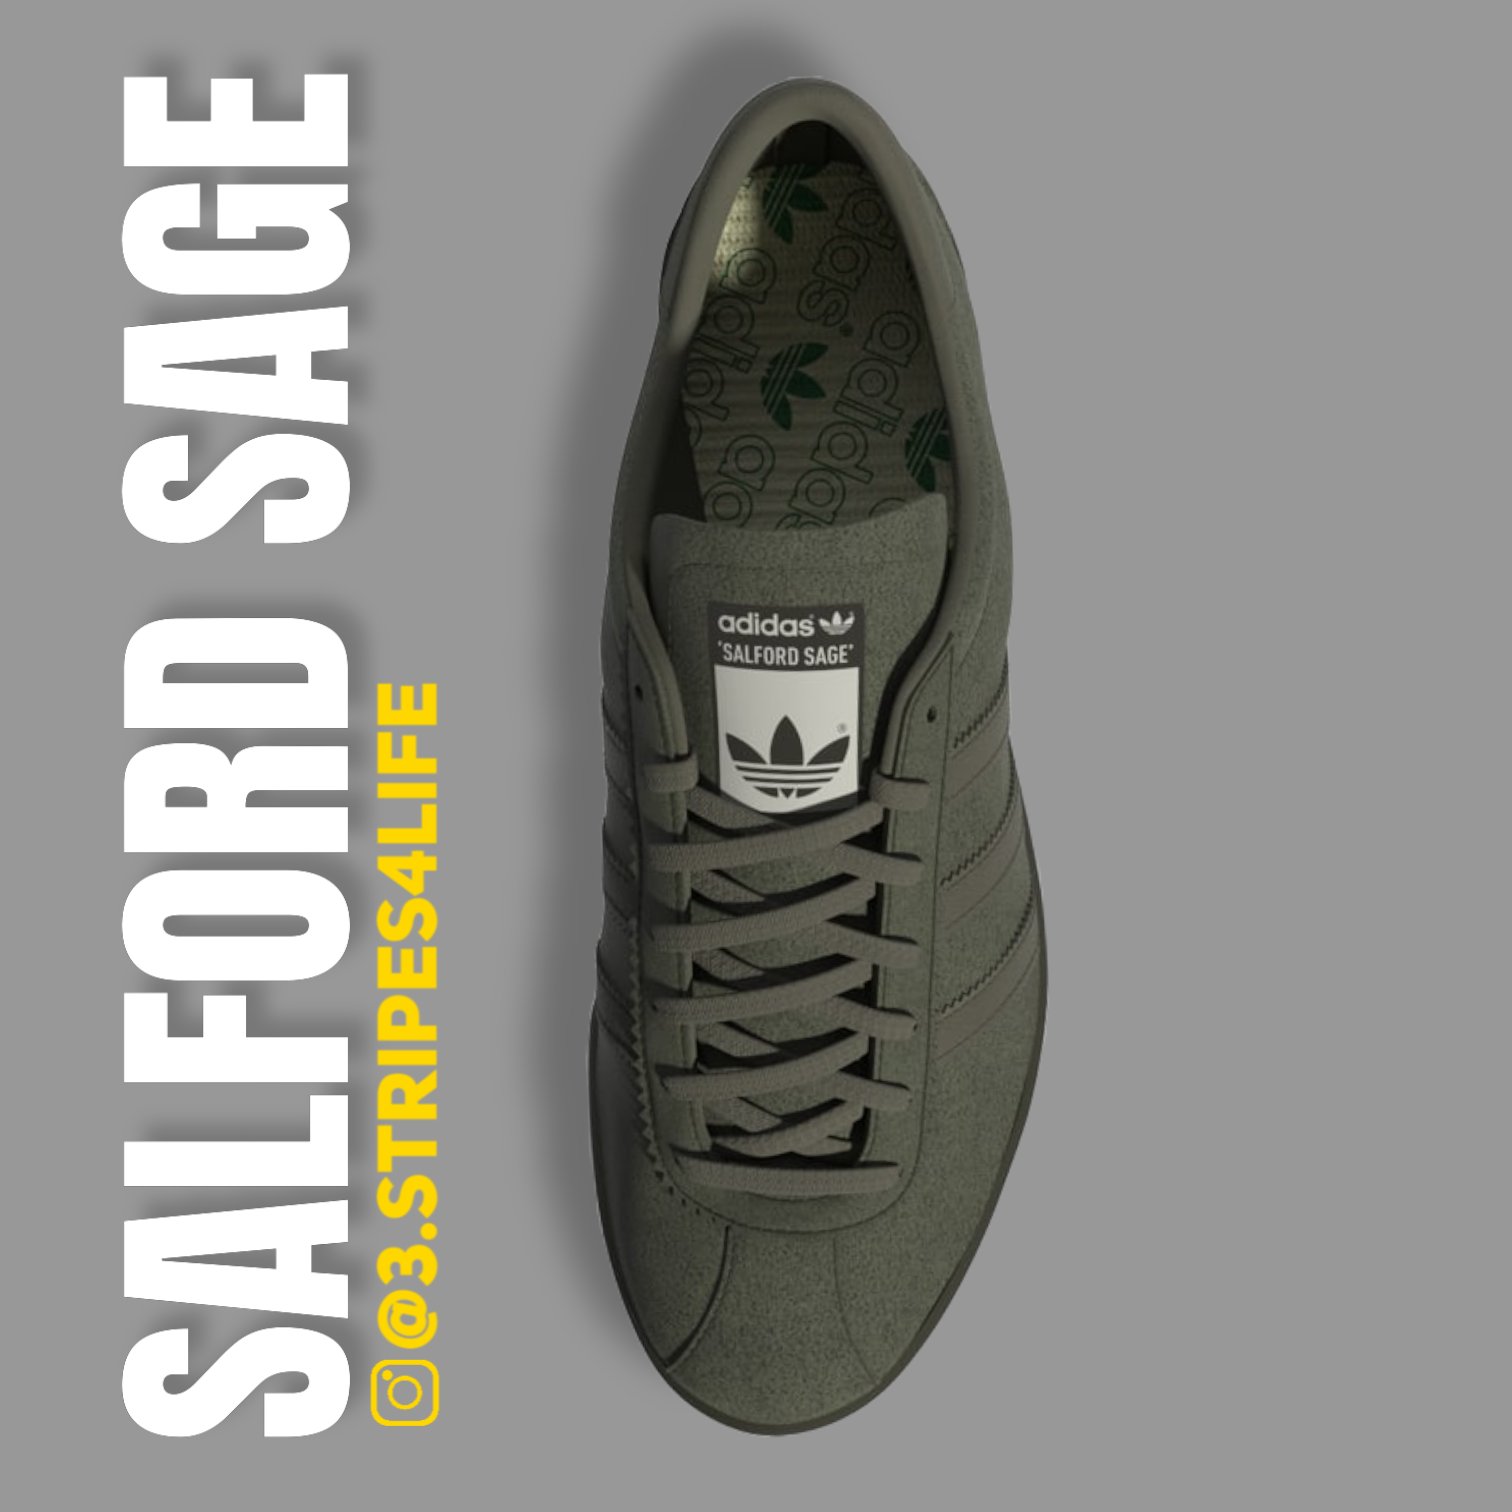 asesinato Sin valor encuentro 3.stripes.4life on Twitter: "Upcoming #adidassalfordsage . General Release  Release Date: November 2021 Price: £85.00 . #adidasshoes #trefoil # adidasoriginals #cityseries #3stripes4life #adidas #casualshoes  #casualstyle #teamtrefoil #casualclobber ...